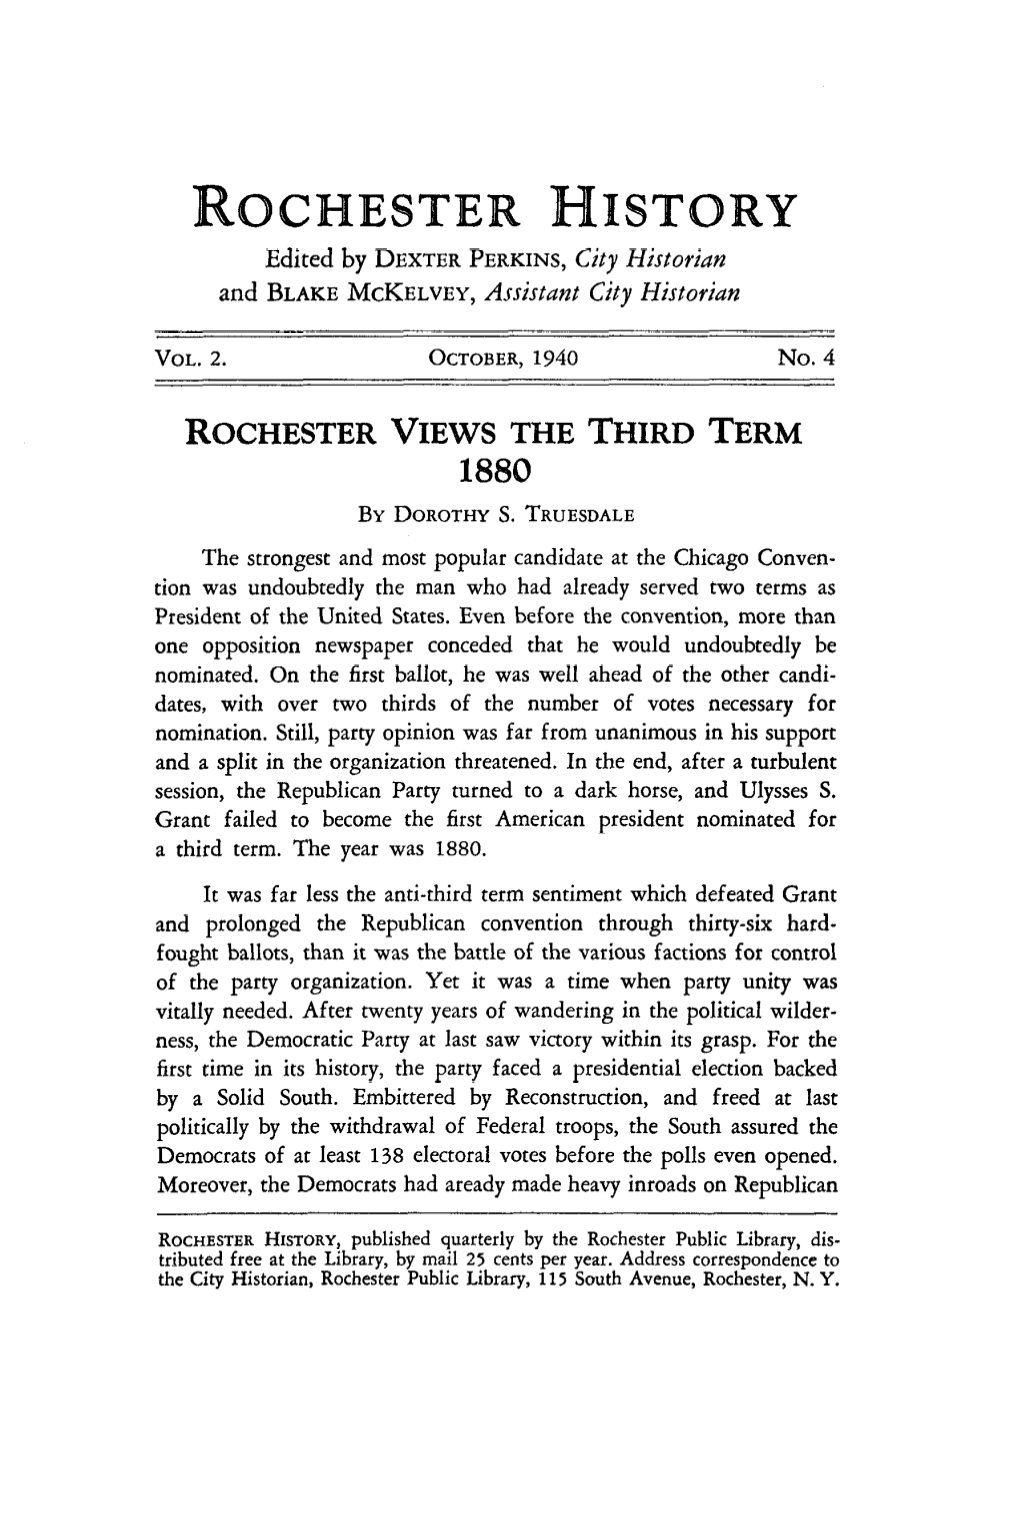 Rochester VIEWS the THIRD TERM 1880 by DOROTHY S